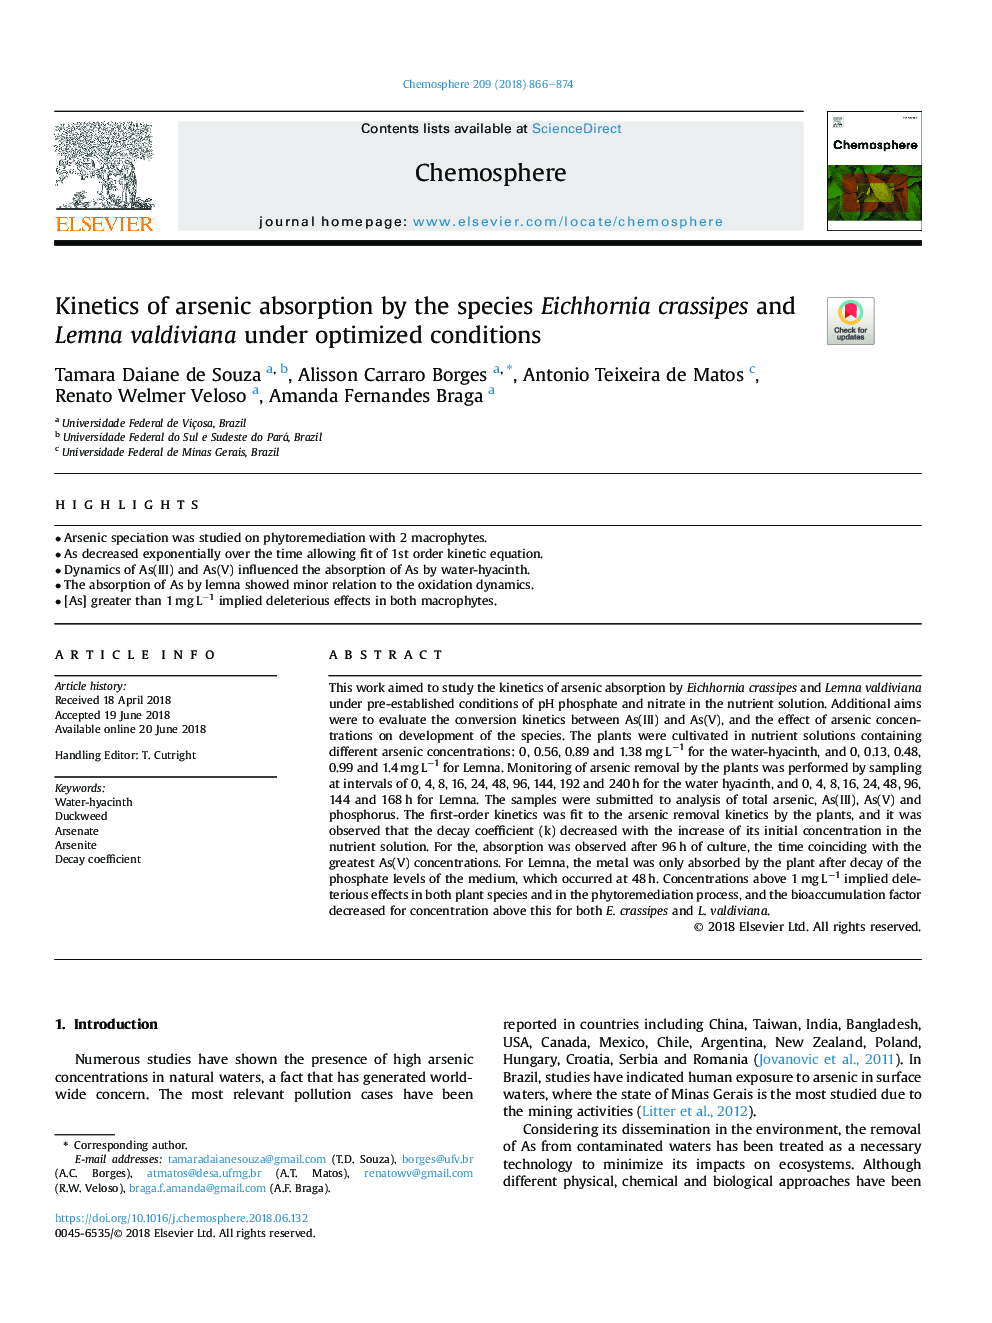 Kinetics of arsenic absorption by the species Eichhornia crassipes and Lemna valdiviana under optimized conditions